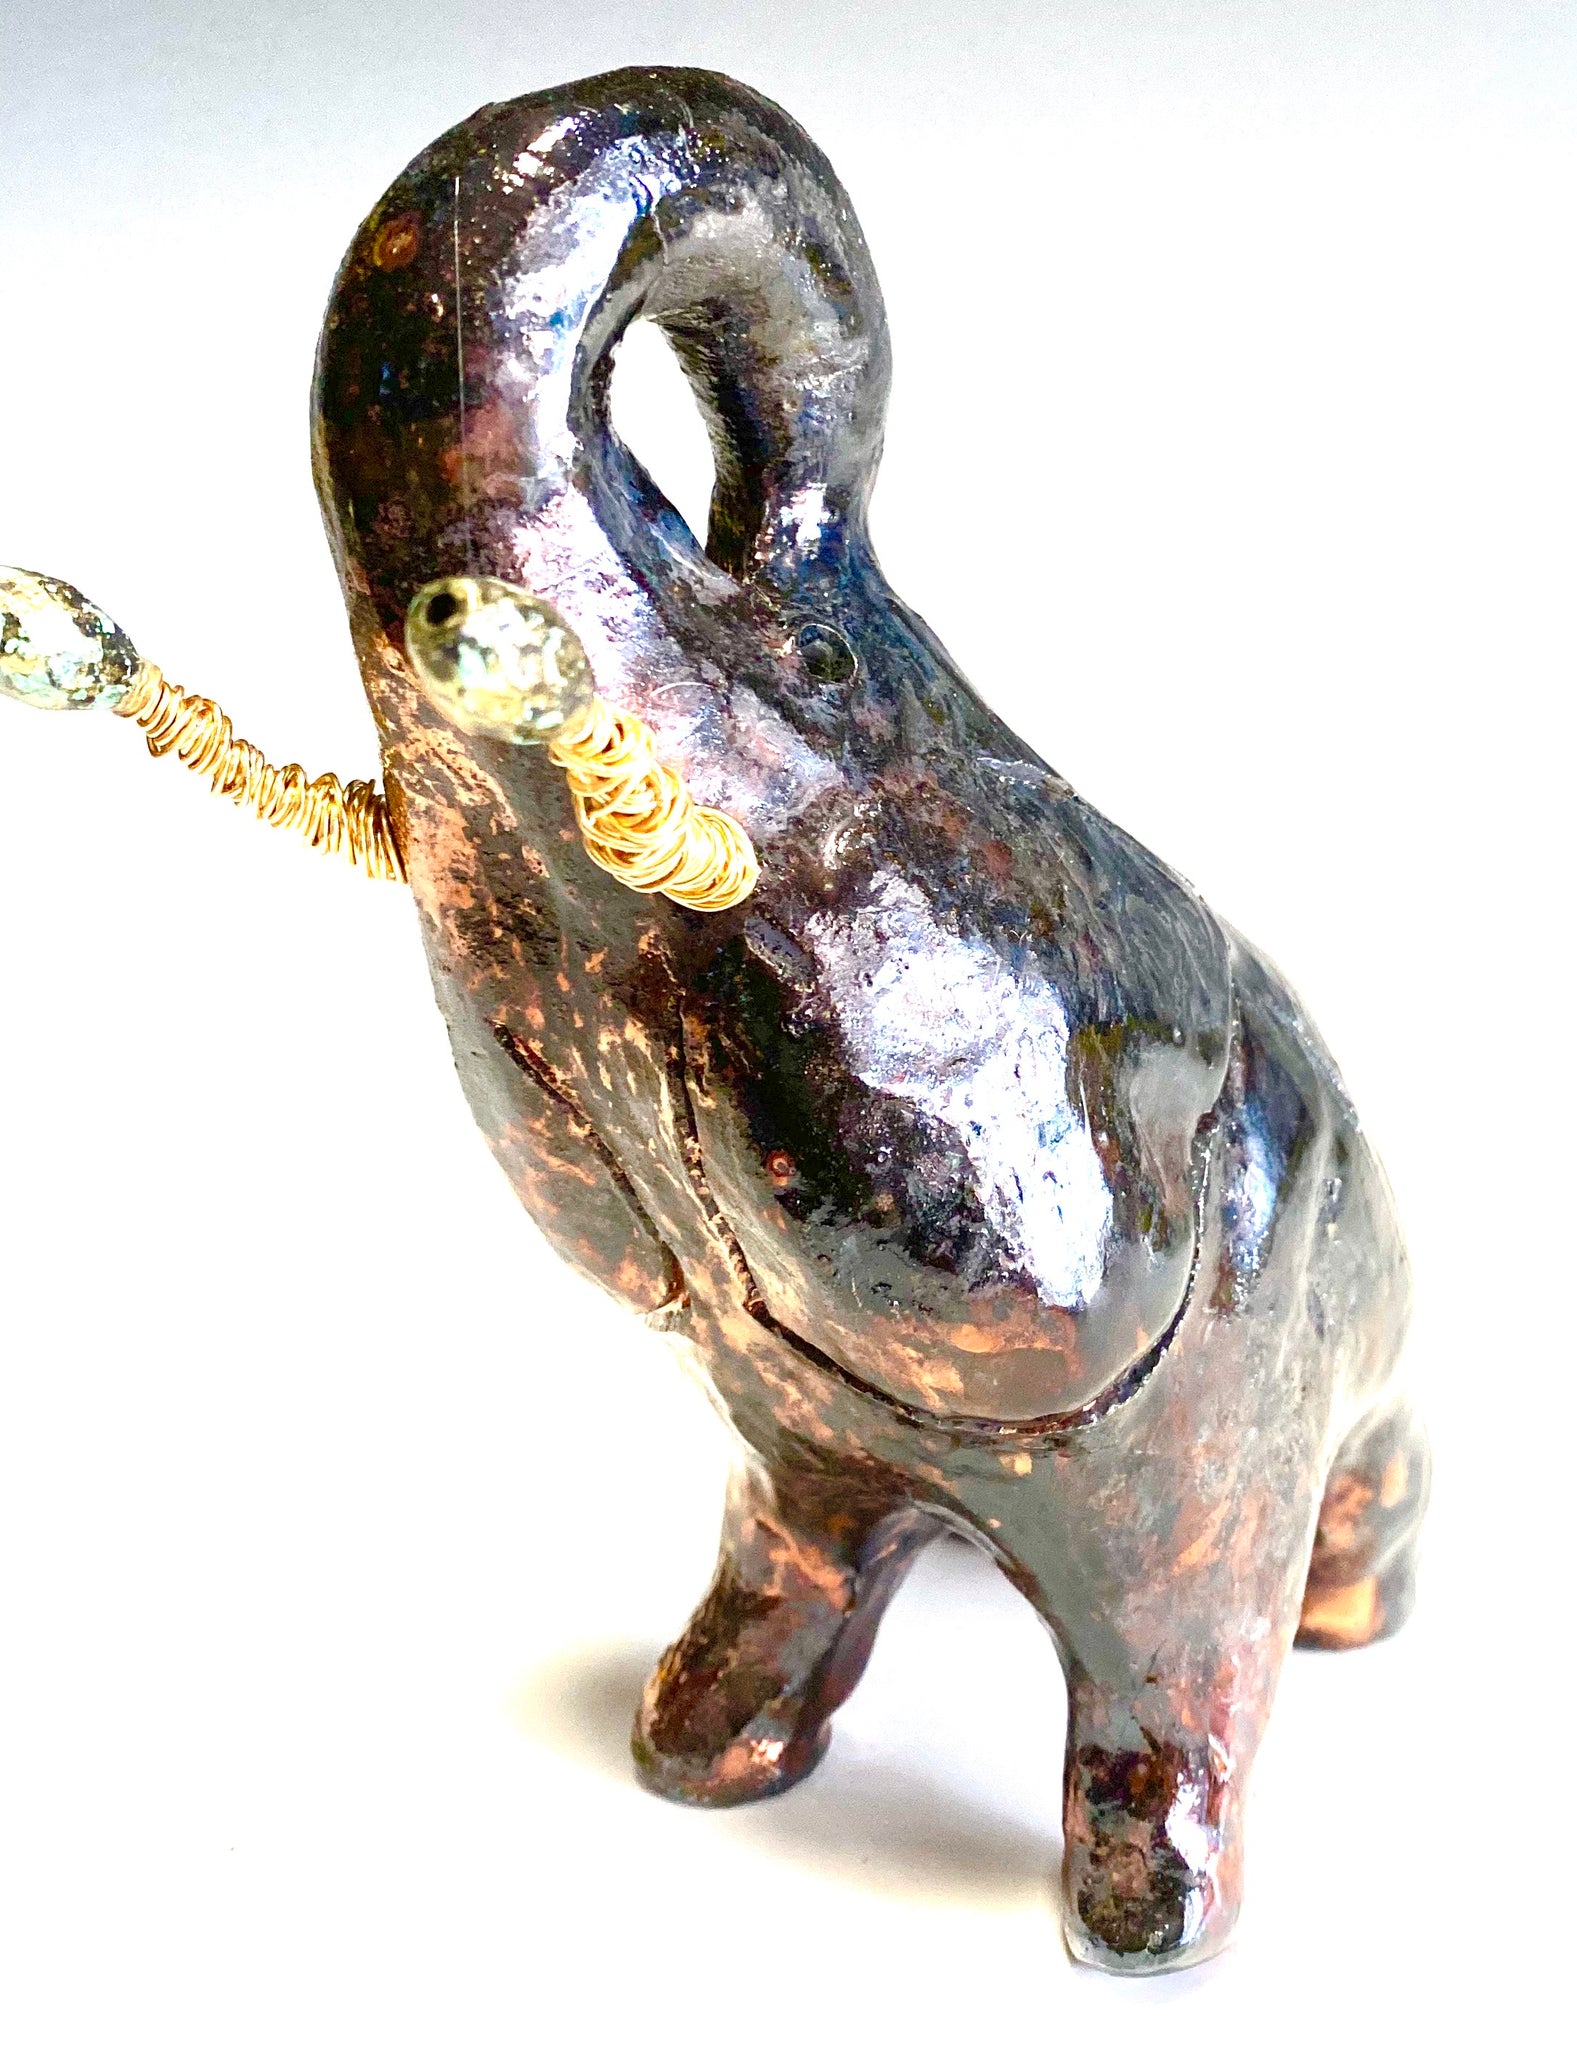 Raku Elephant Have you HERD!!!!!!  Just one of these lovely Raku Fired Elephant will make an excellent gift for your  friend, sorority or for your home’ special place centerpiece.  6" x 4" x 3" 13 ozs. Beautiful  dark copper metallic  raku elephant For decorative purposely only.